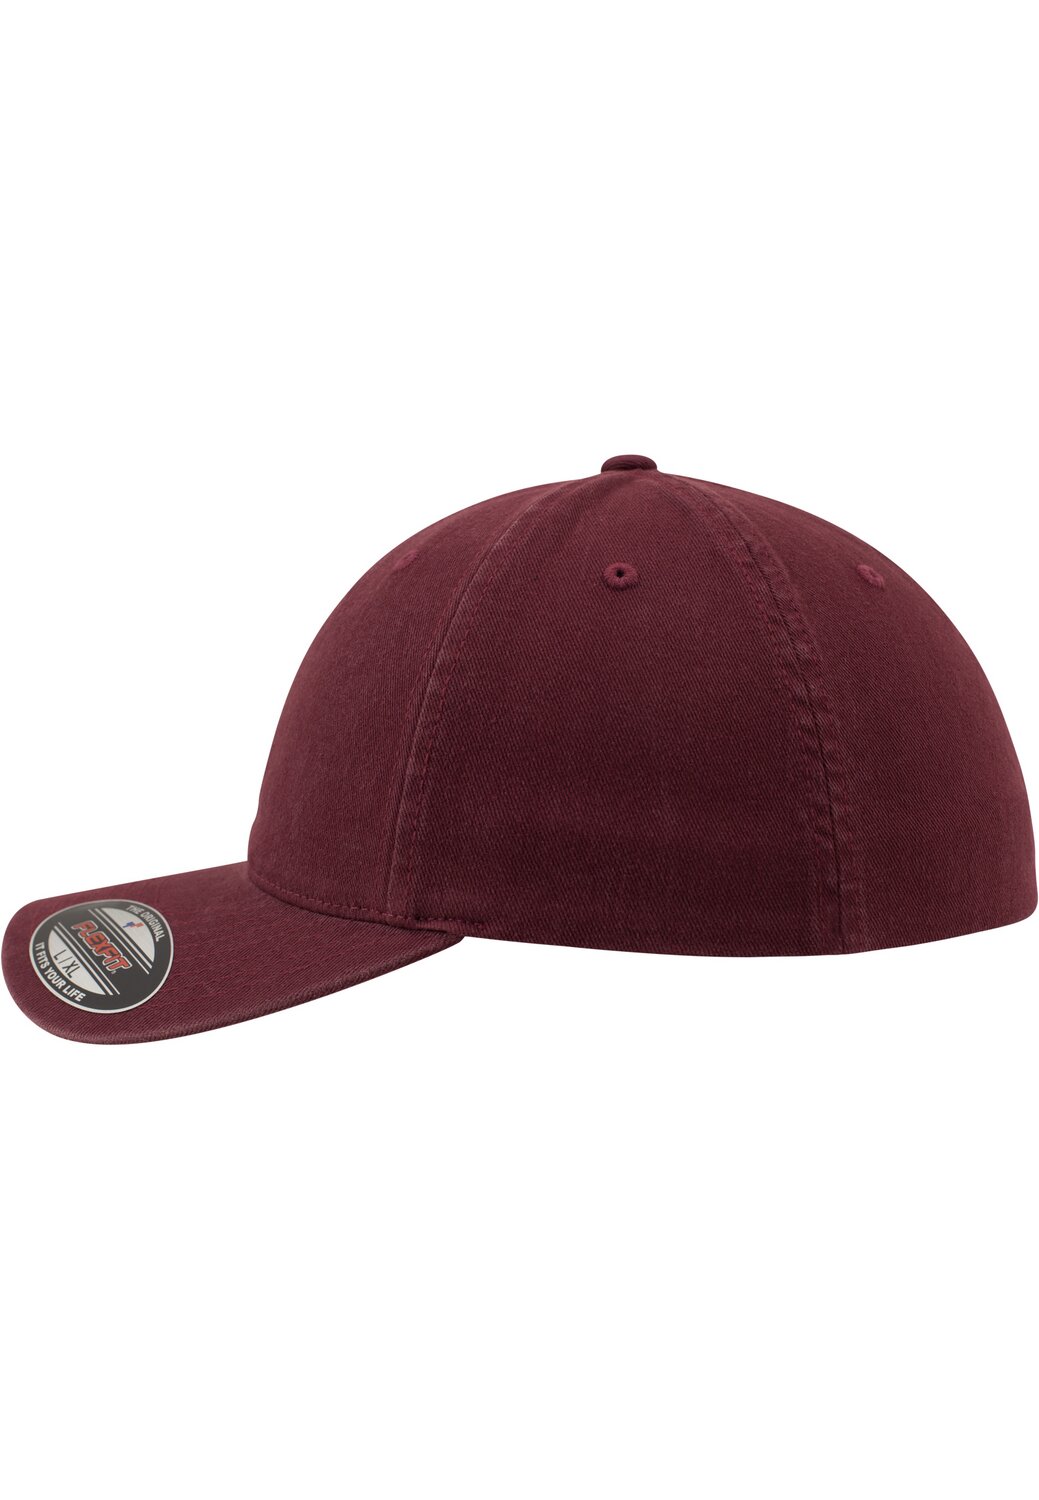 Washed | Dad Cotton MAXISCOOT Hat maroon Flexfit Garment